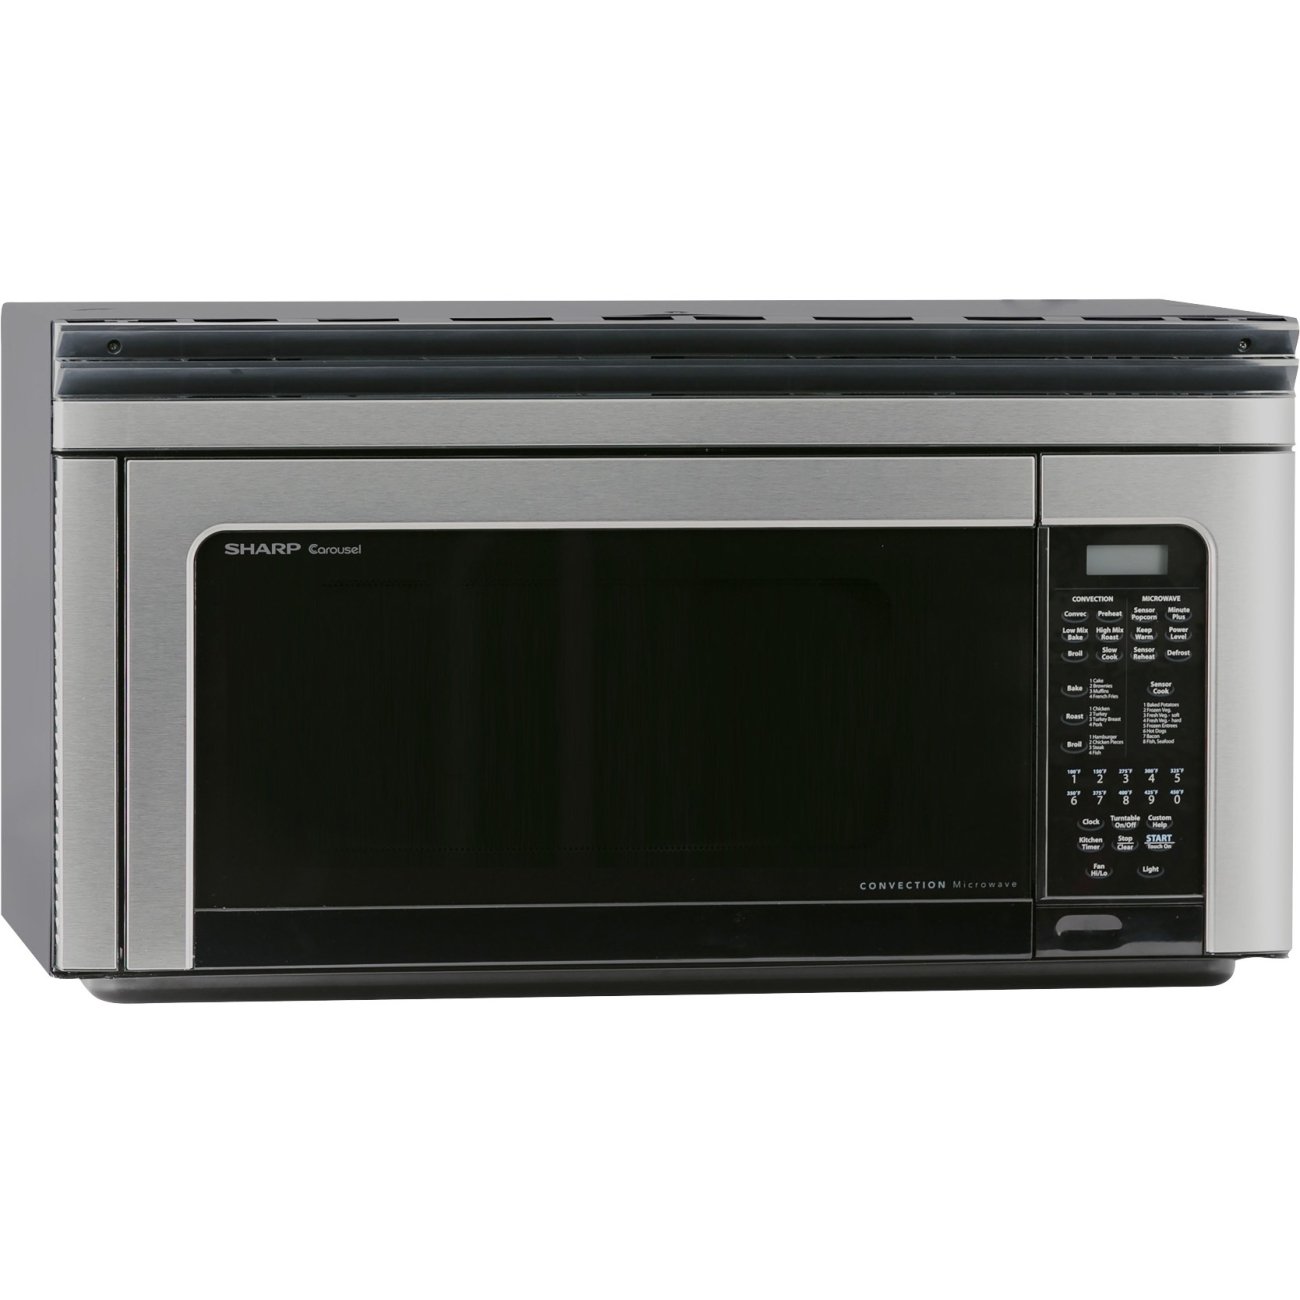 Sharp 1.1 Cu. Ft. 850W Over-The-Range Convection Microwave Oven in Stainless Steel